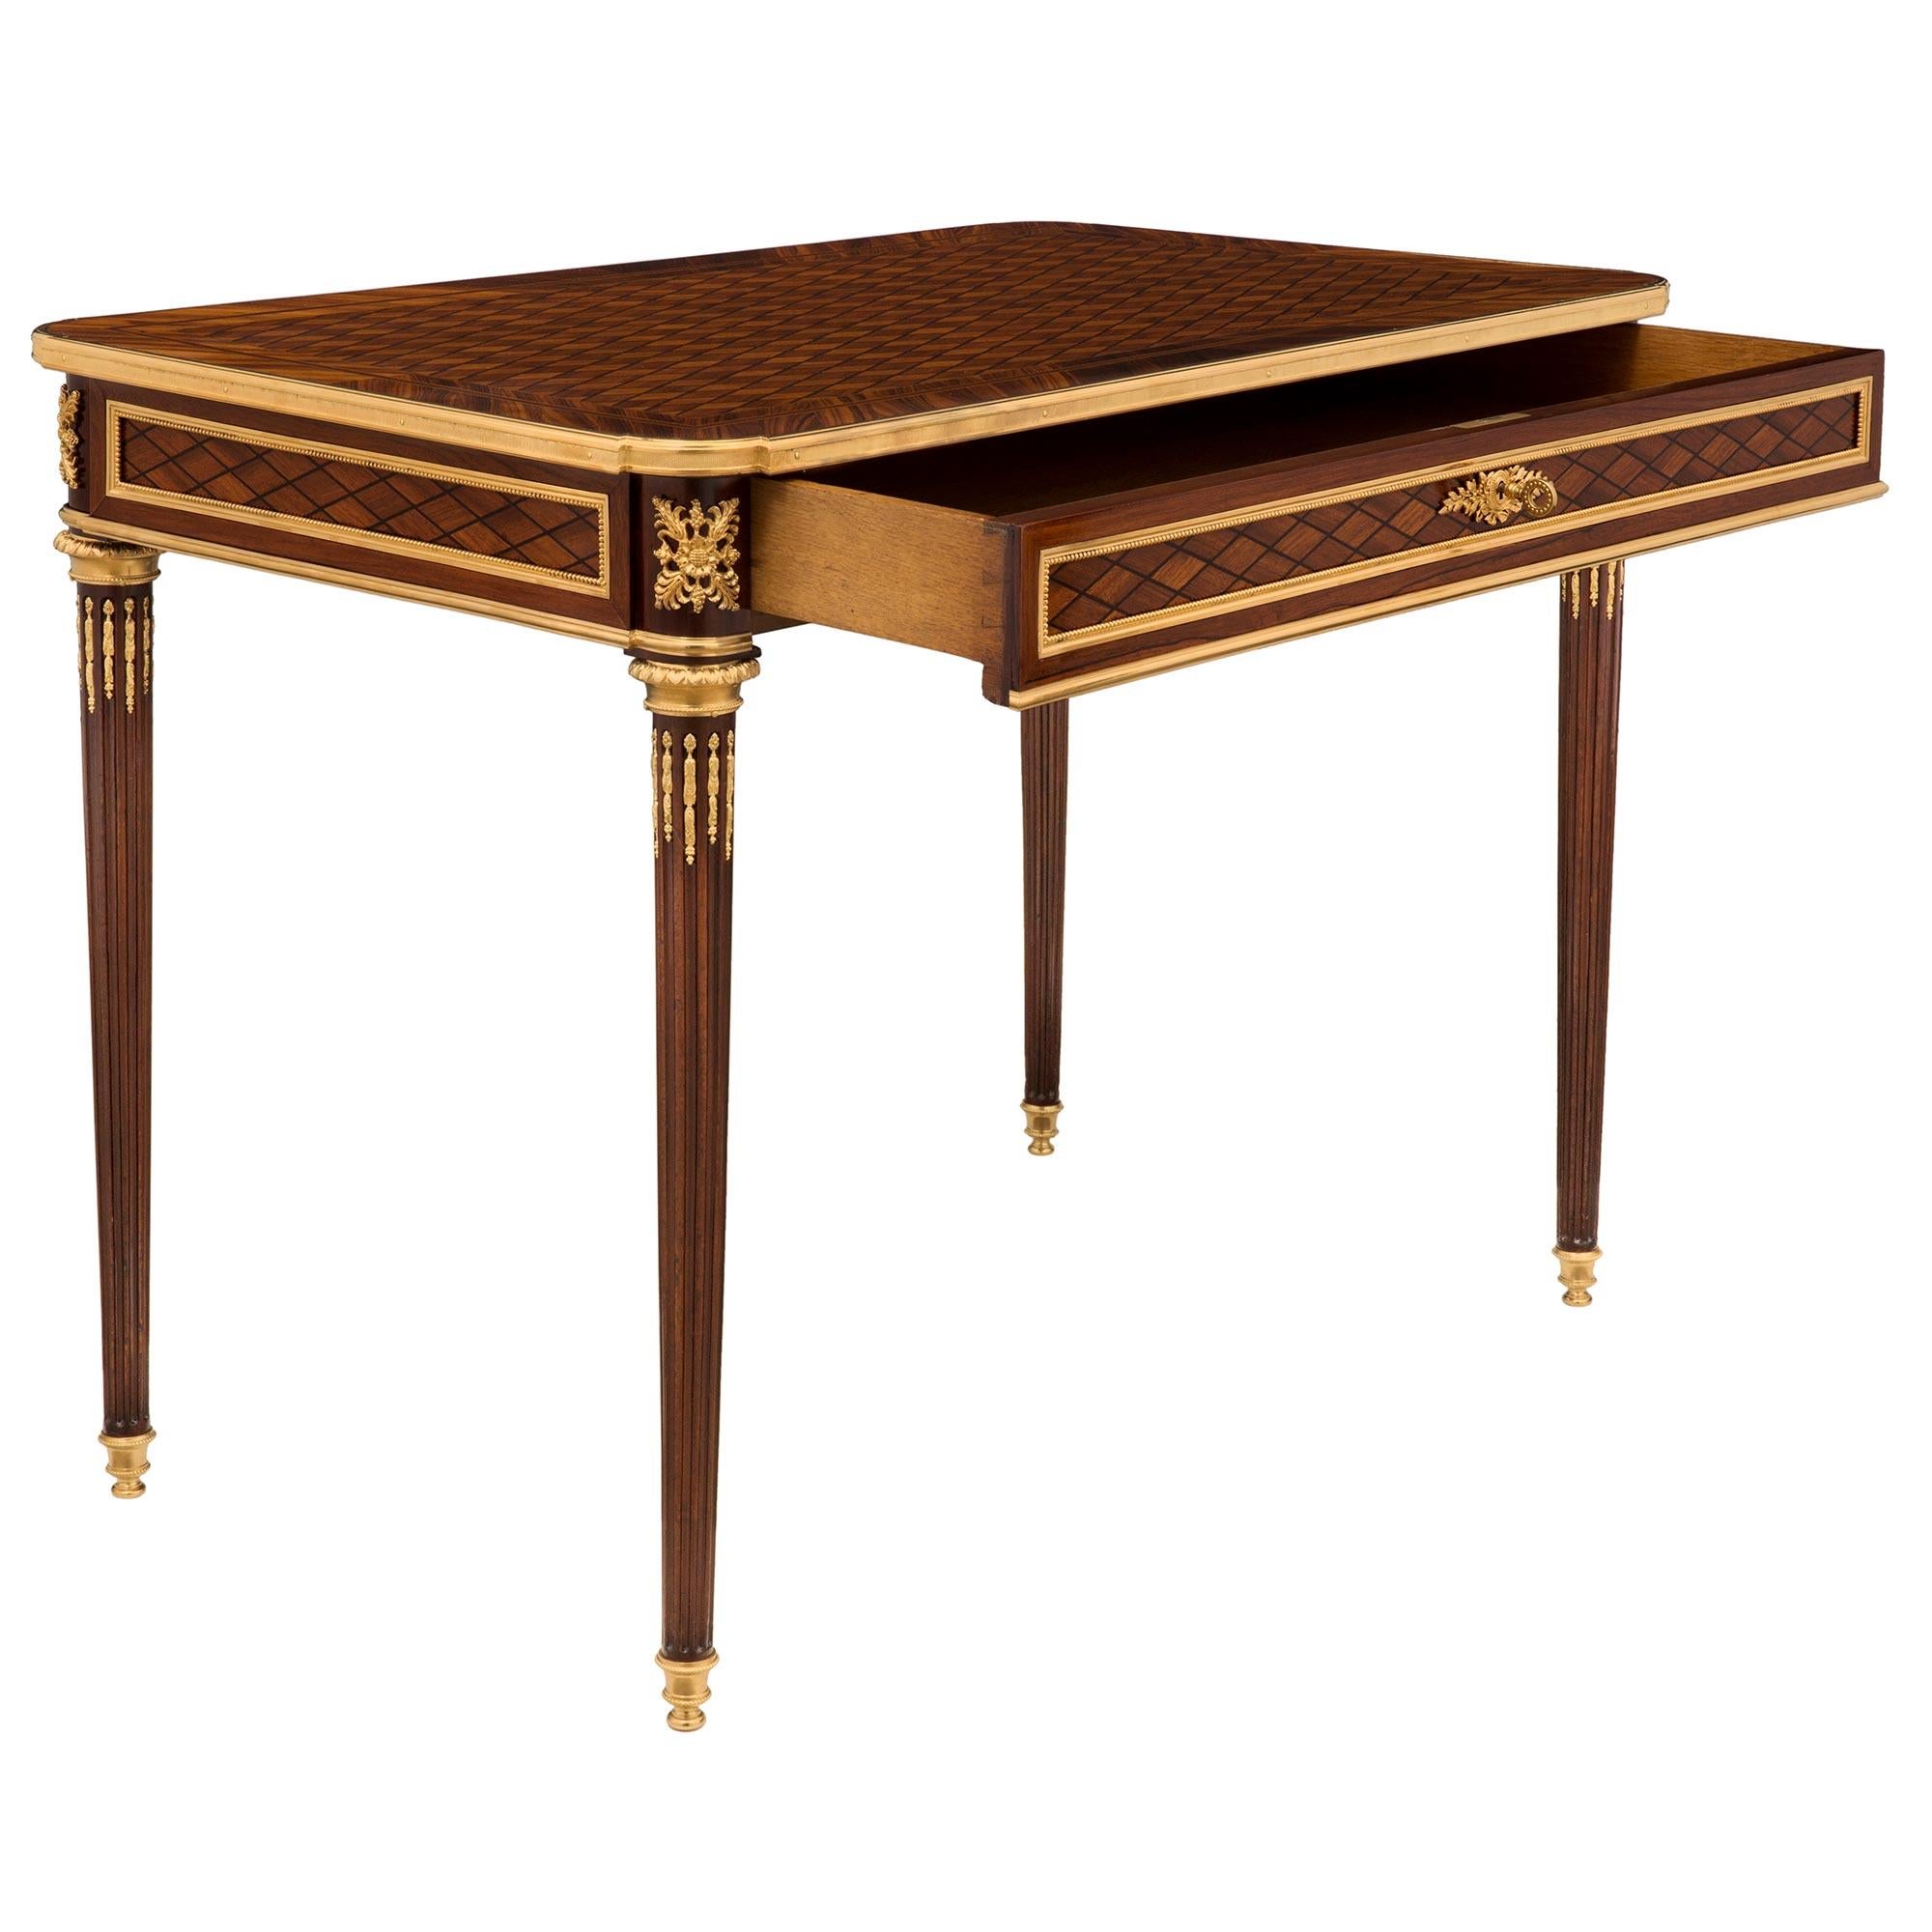 French 19th Century Louis XVI Style Kingwood, Ebony, Mahogany, Ormolu Side Table In Good Condition For Sale In West Palm Beach, FL